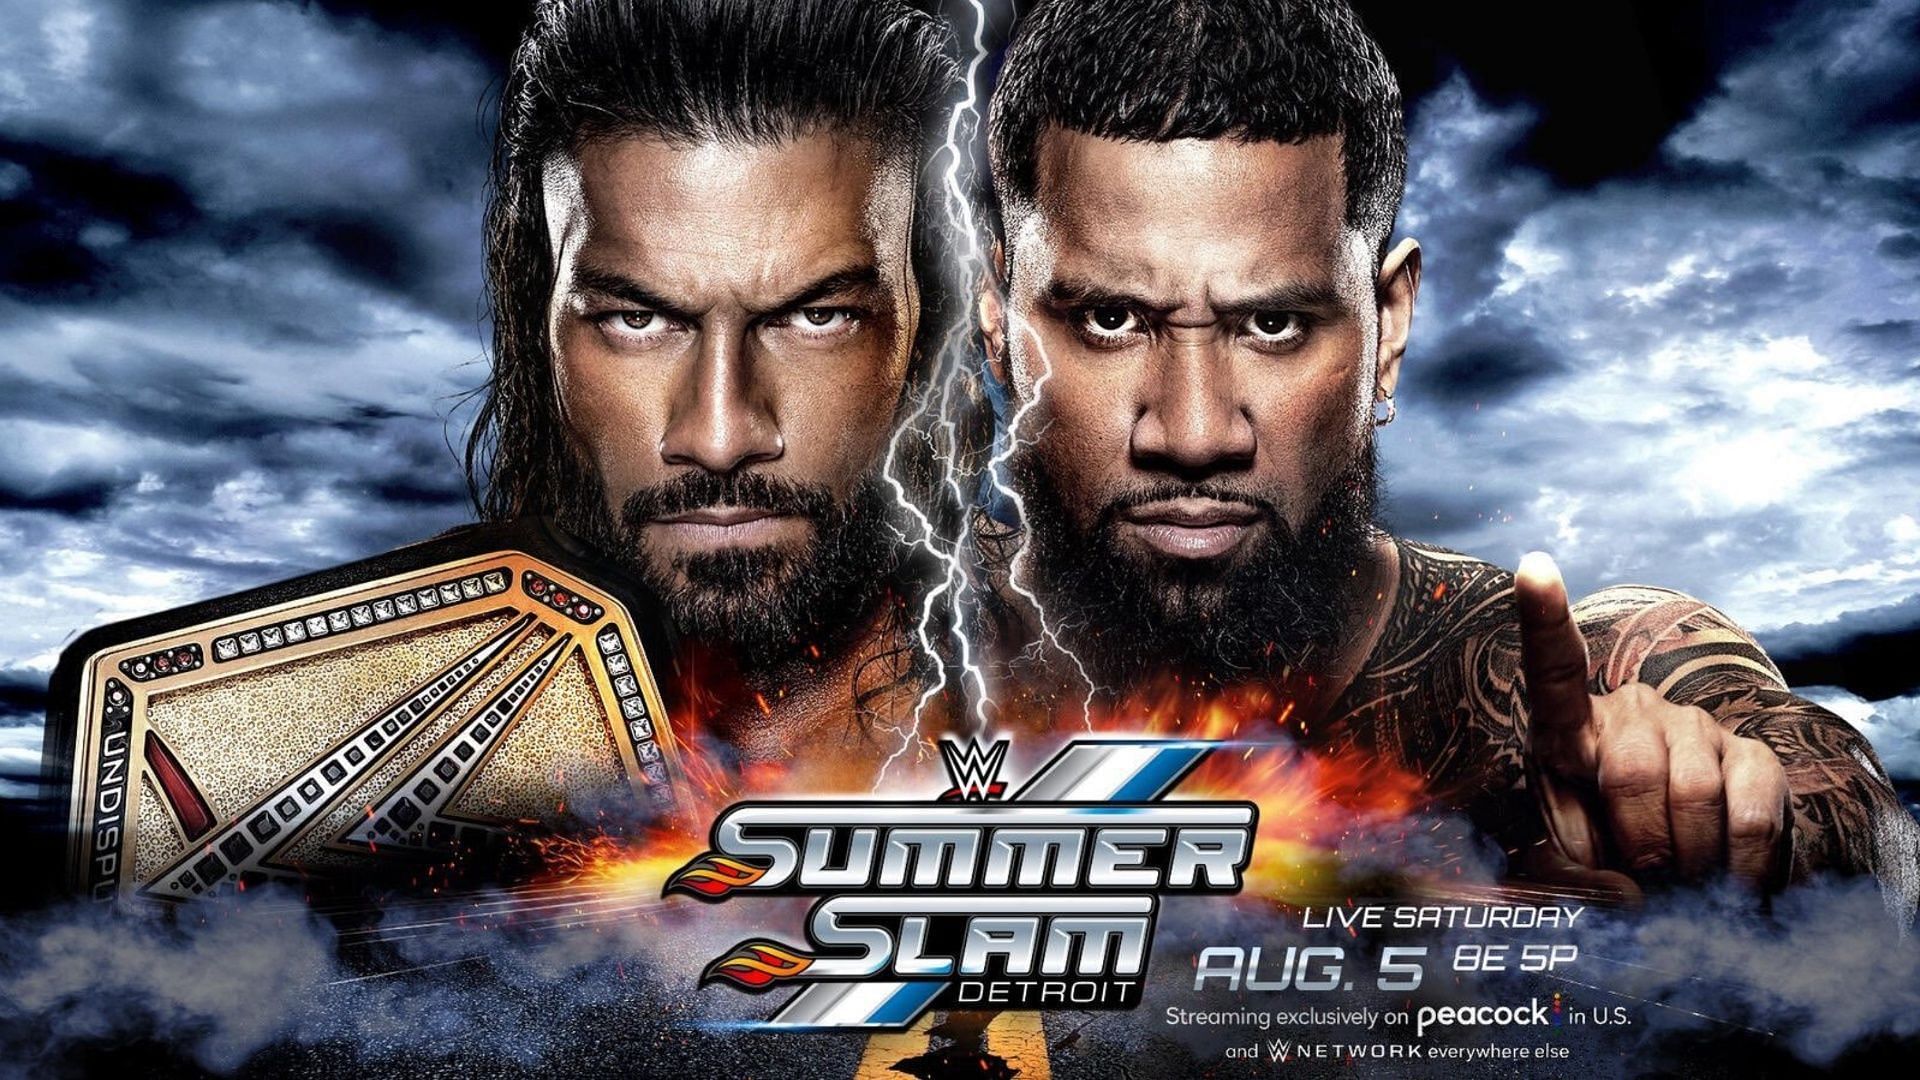 Roman Reigns to ban 30yearold star from helping him at SummerSlam